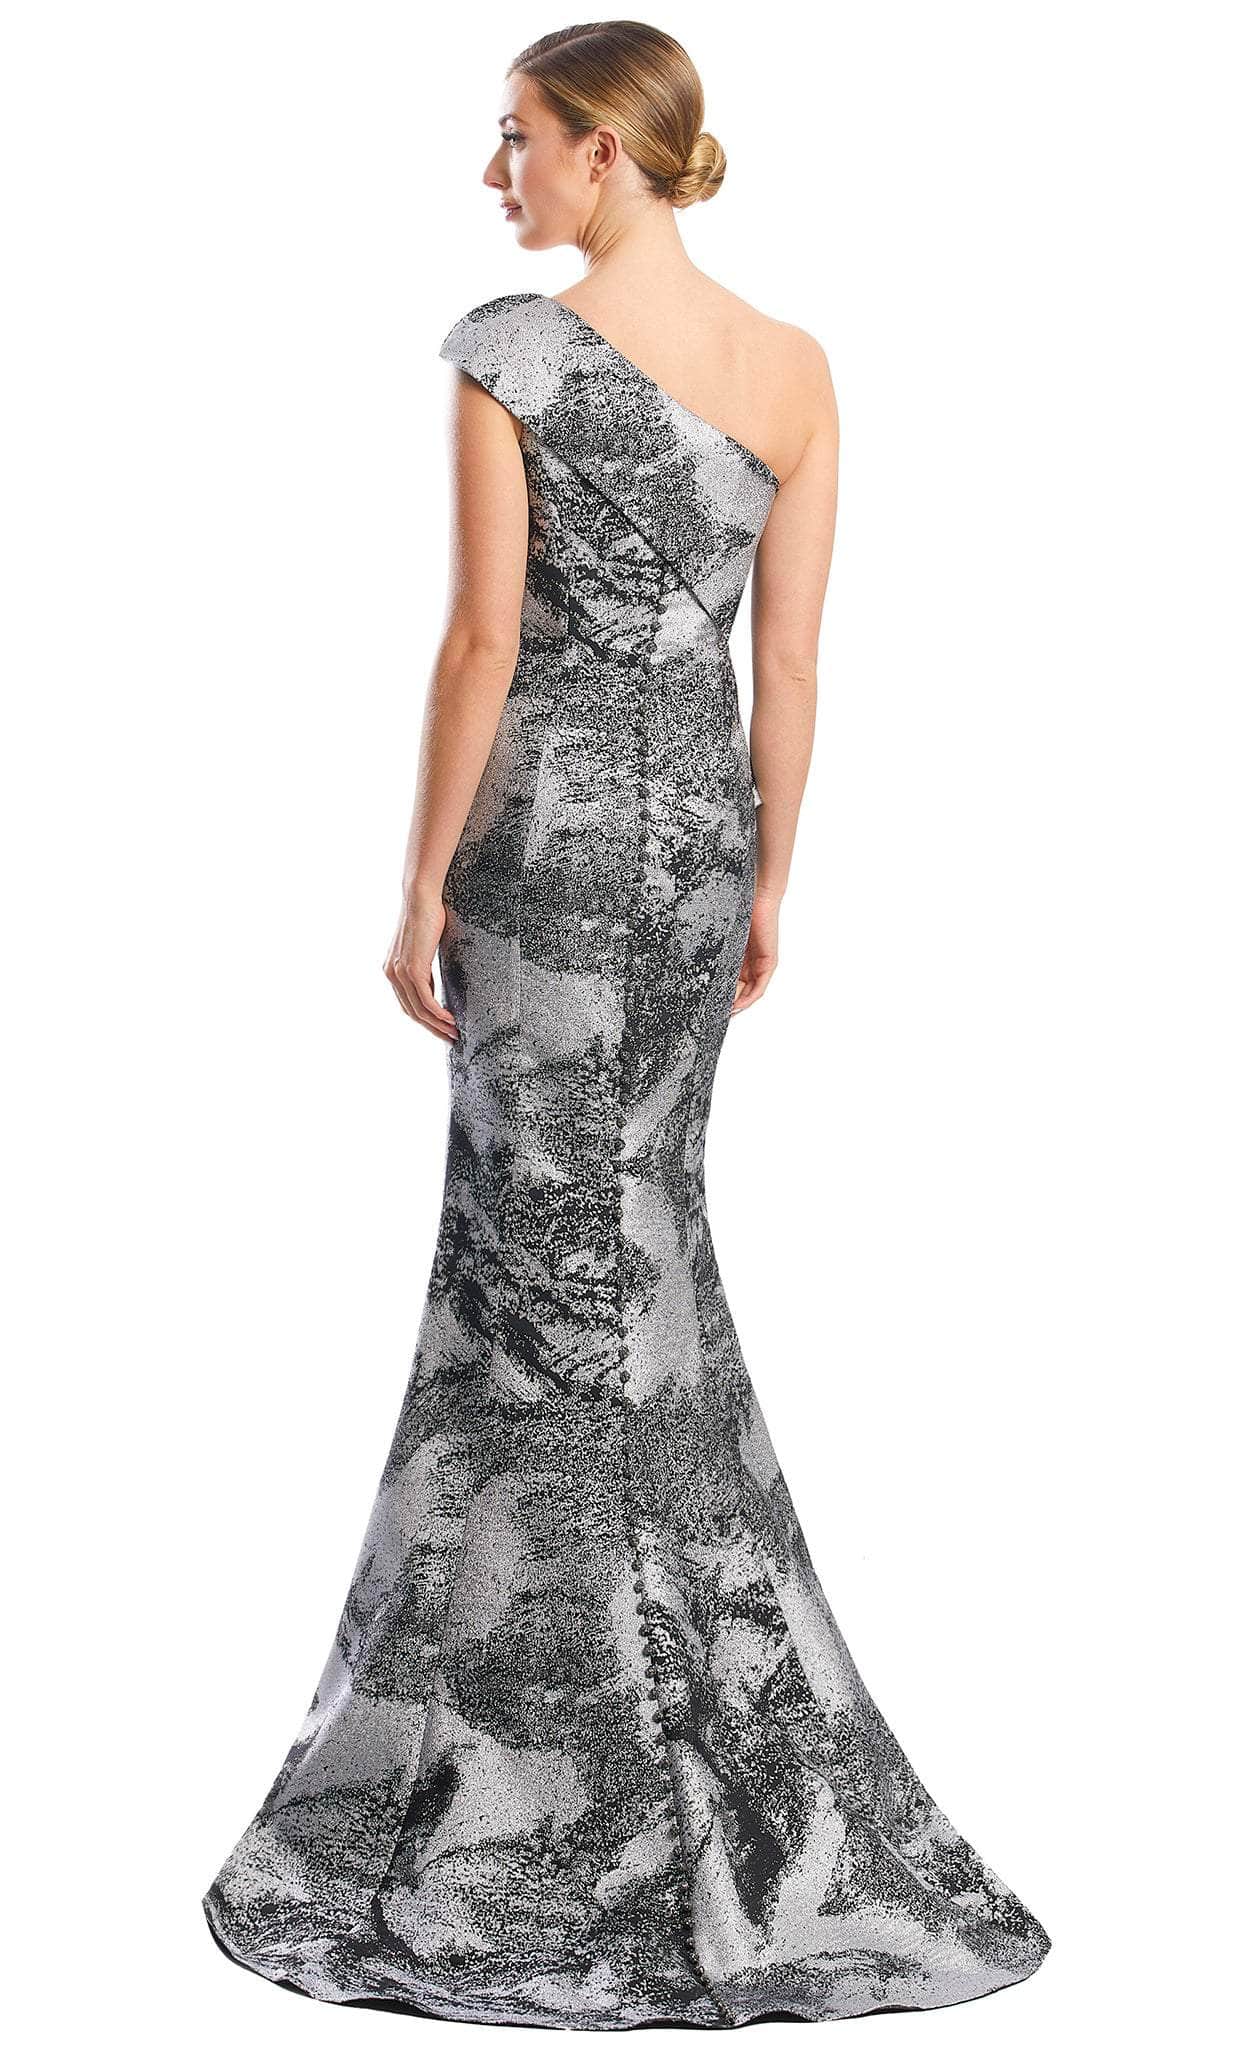 Alexander by Daymor 1782S23 - One Shoulder Printed Trumpet Gown Evening Dresses